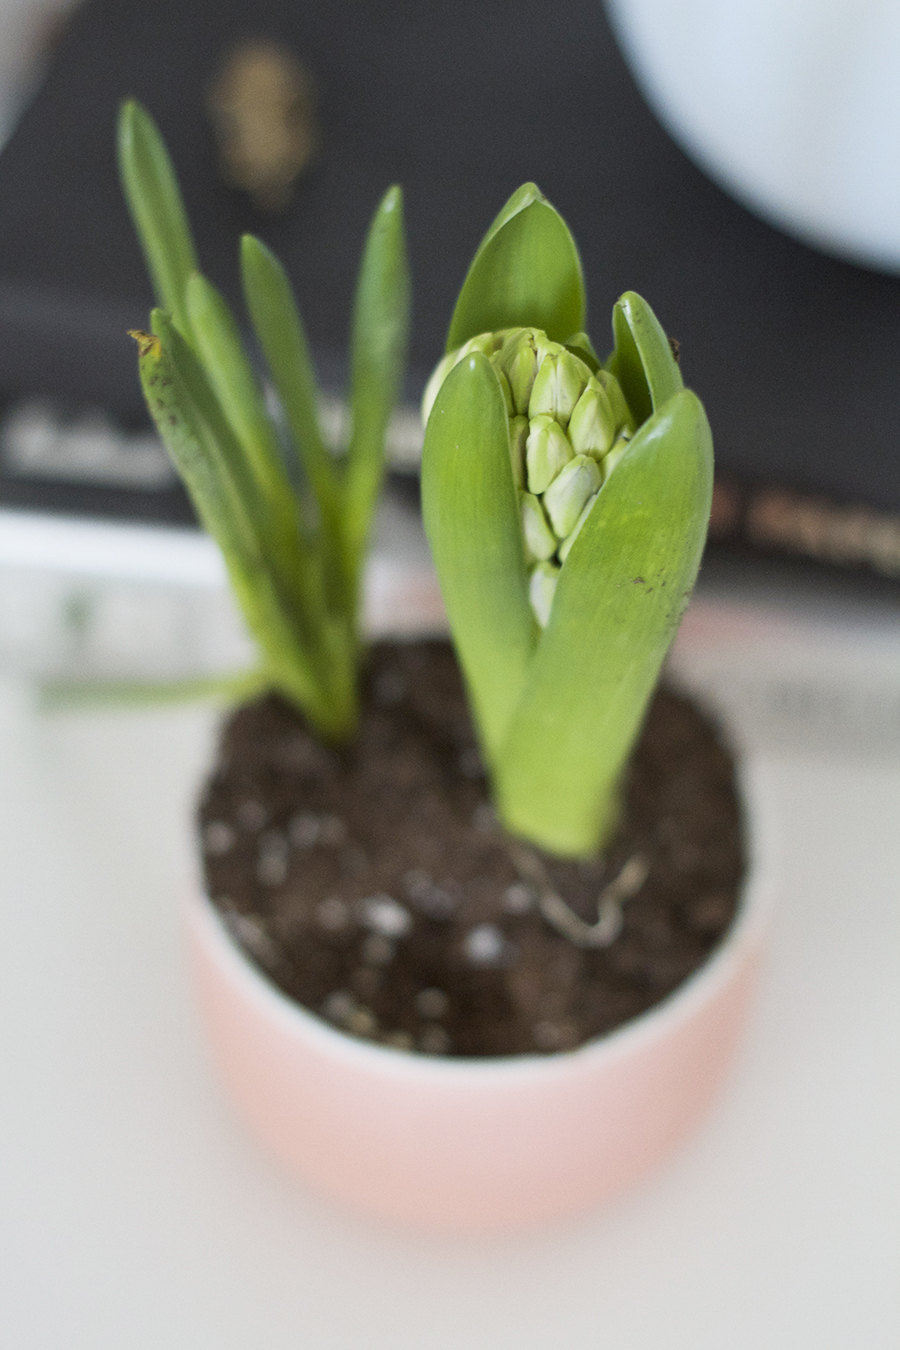 Add Spring to your home using grocery store bulb gardens and pretty little vessels